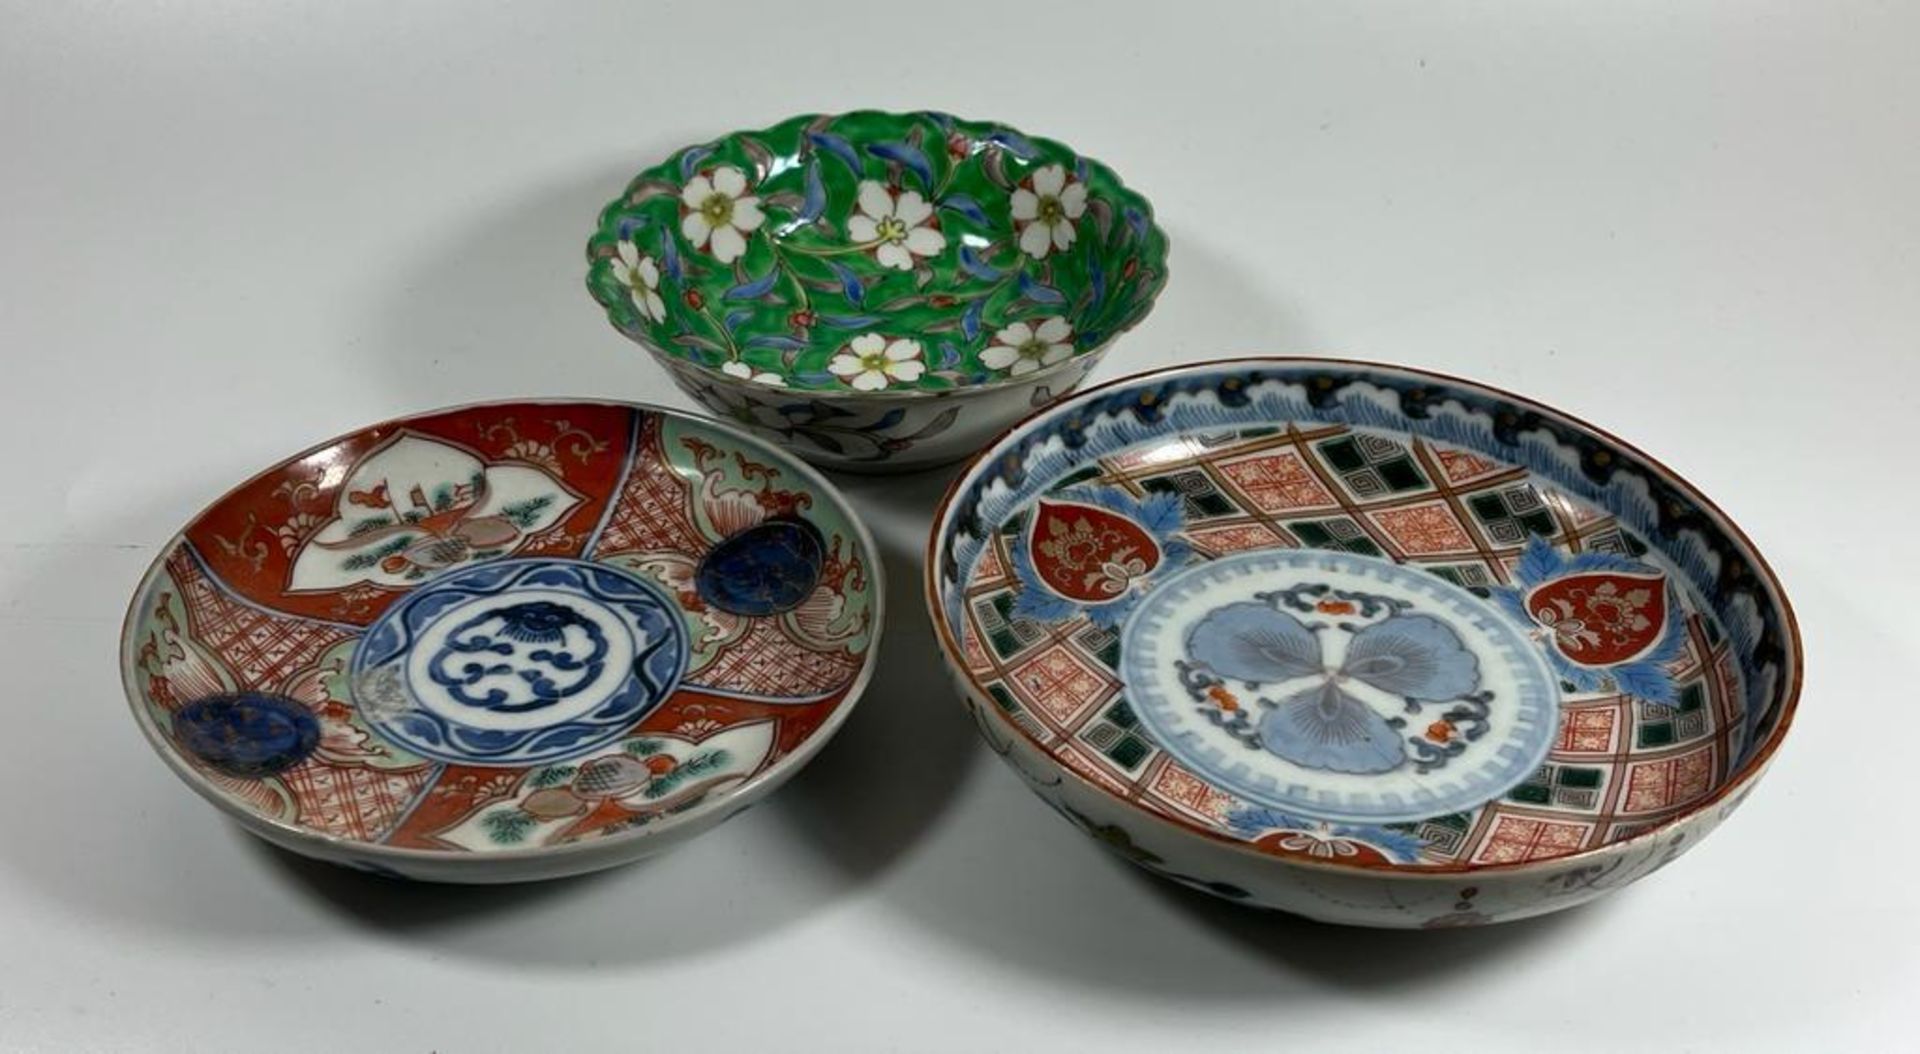 THREE 19TH CENTURY JAPANESE MEIJI PERIOD DISHES TO INCLUDE GREEN ENAMEL AND GEOMETRIC DESIGN